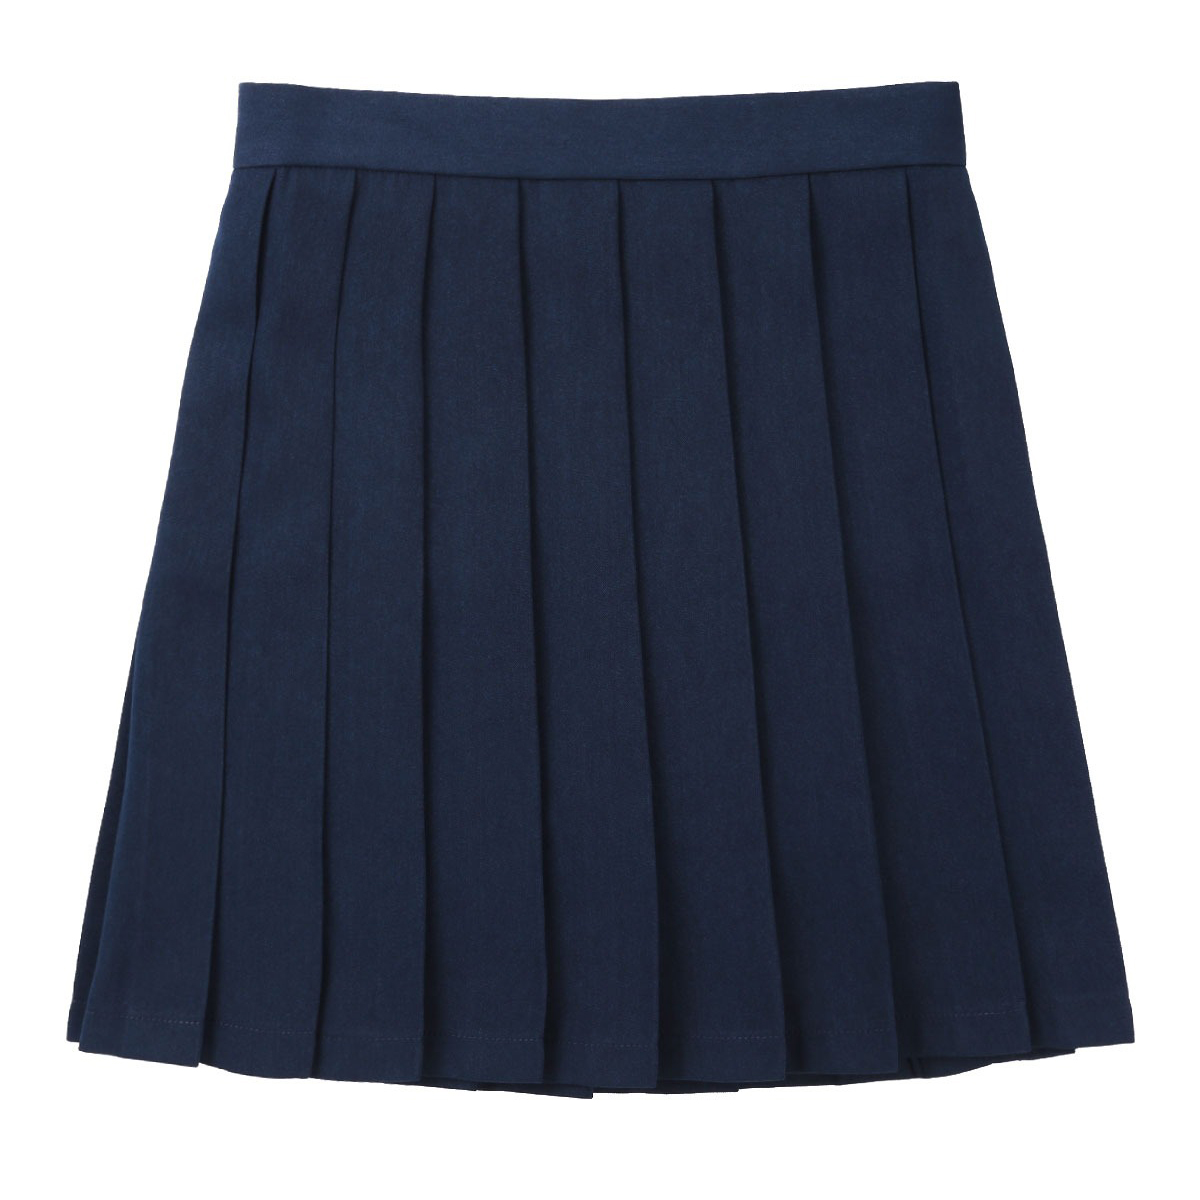 Women's High Waisted Pleated Mini Skirt / A-Line Solid Color Skirt / School Girl Cosplay Costume - HARD'N'HEAVY